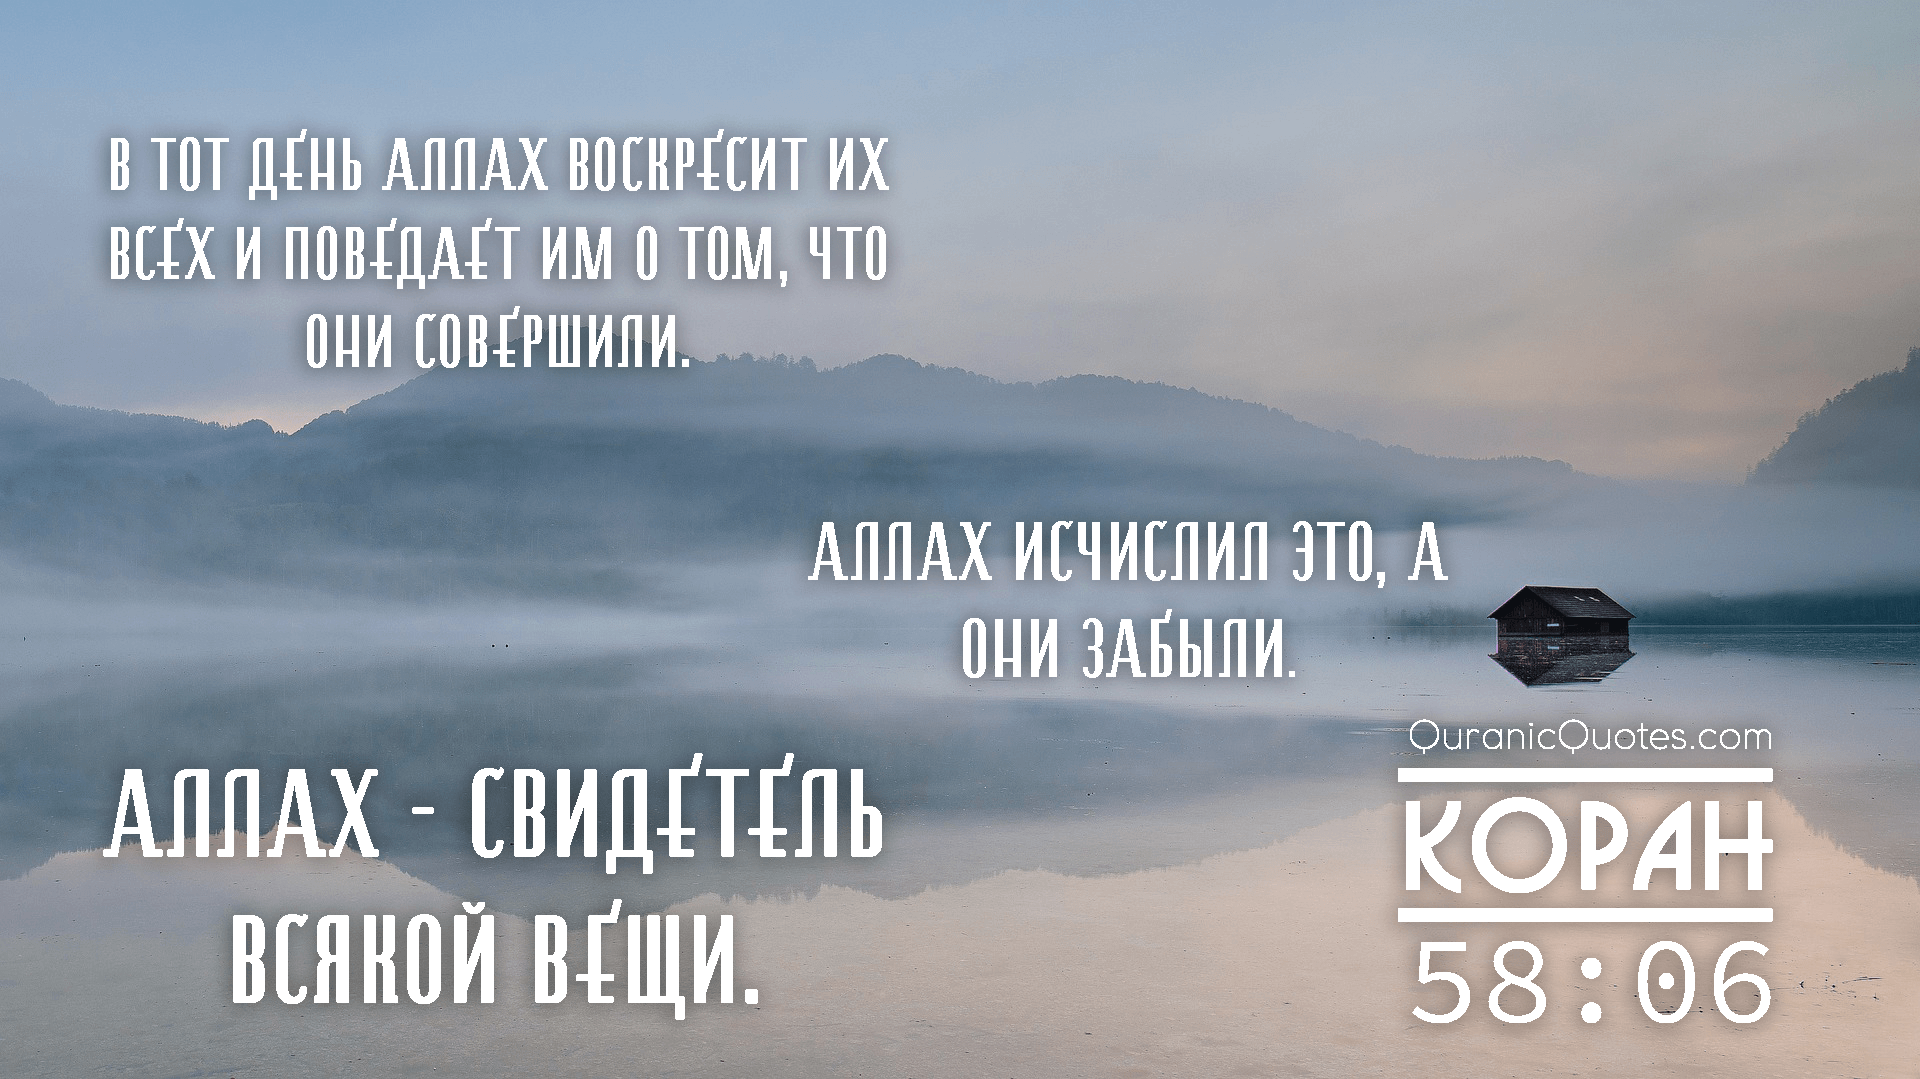 Quranic Quotes in Russian #40